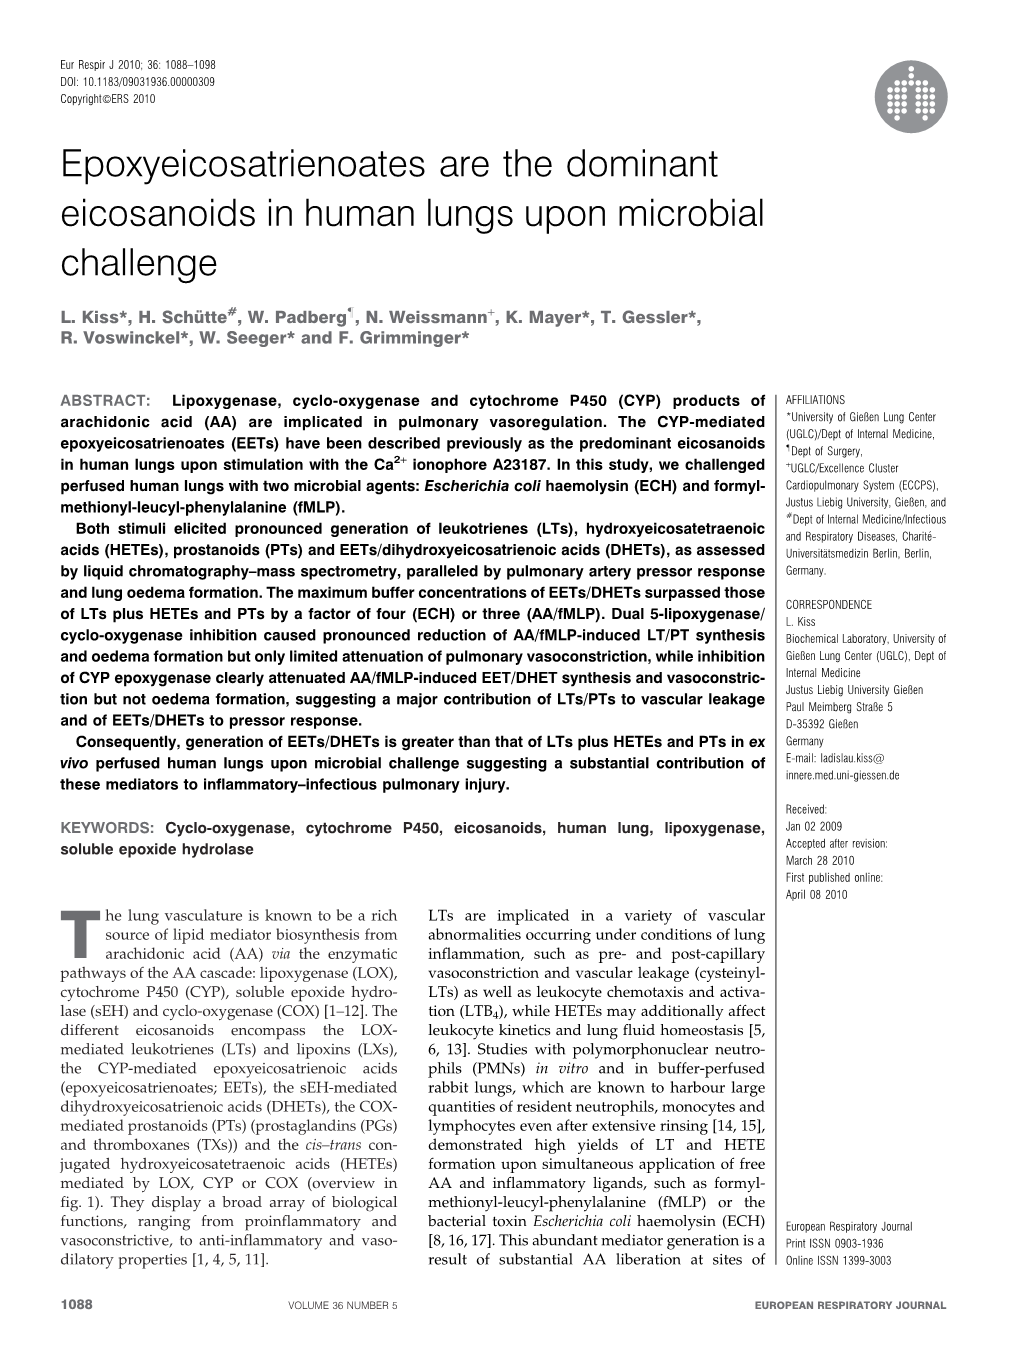 Epoxyeicosatrienoates Are the Dominant Eicosanoids in Human Lungs Upon Microbial Challenge